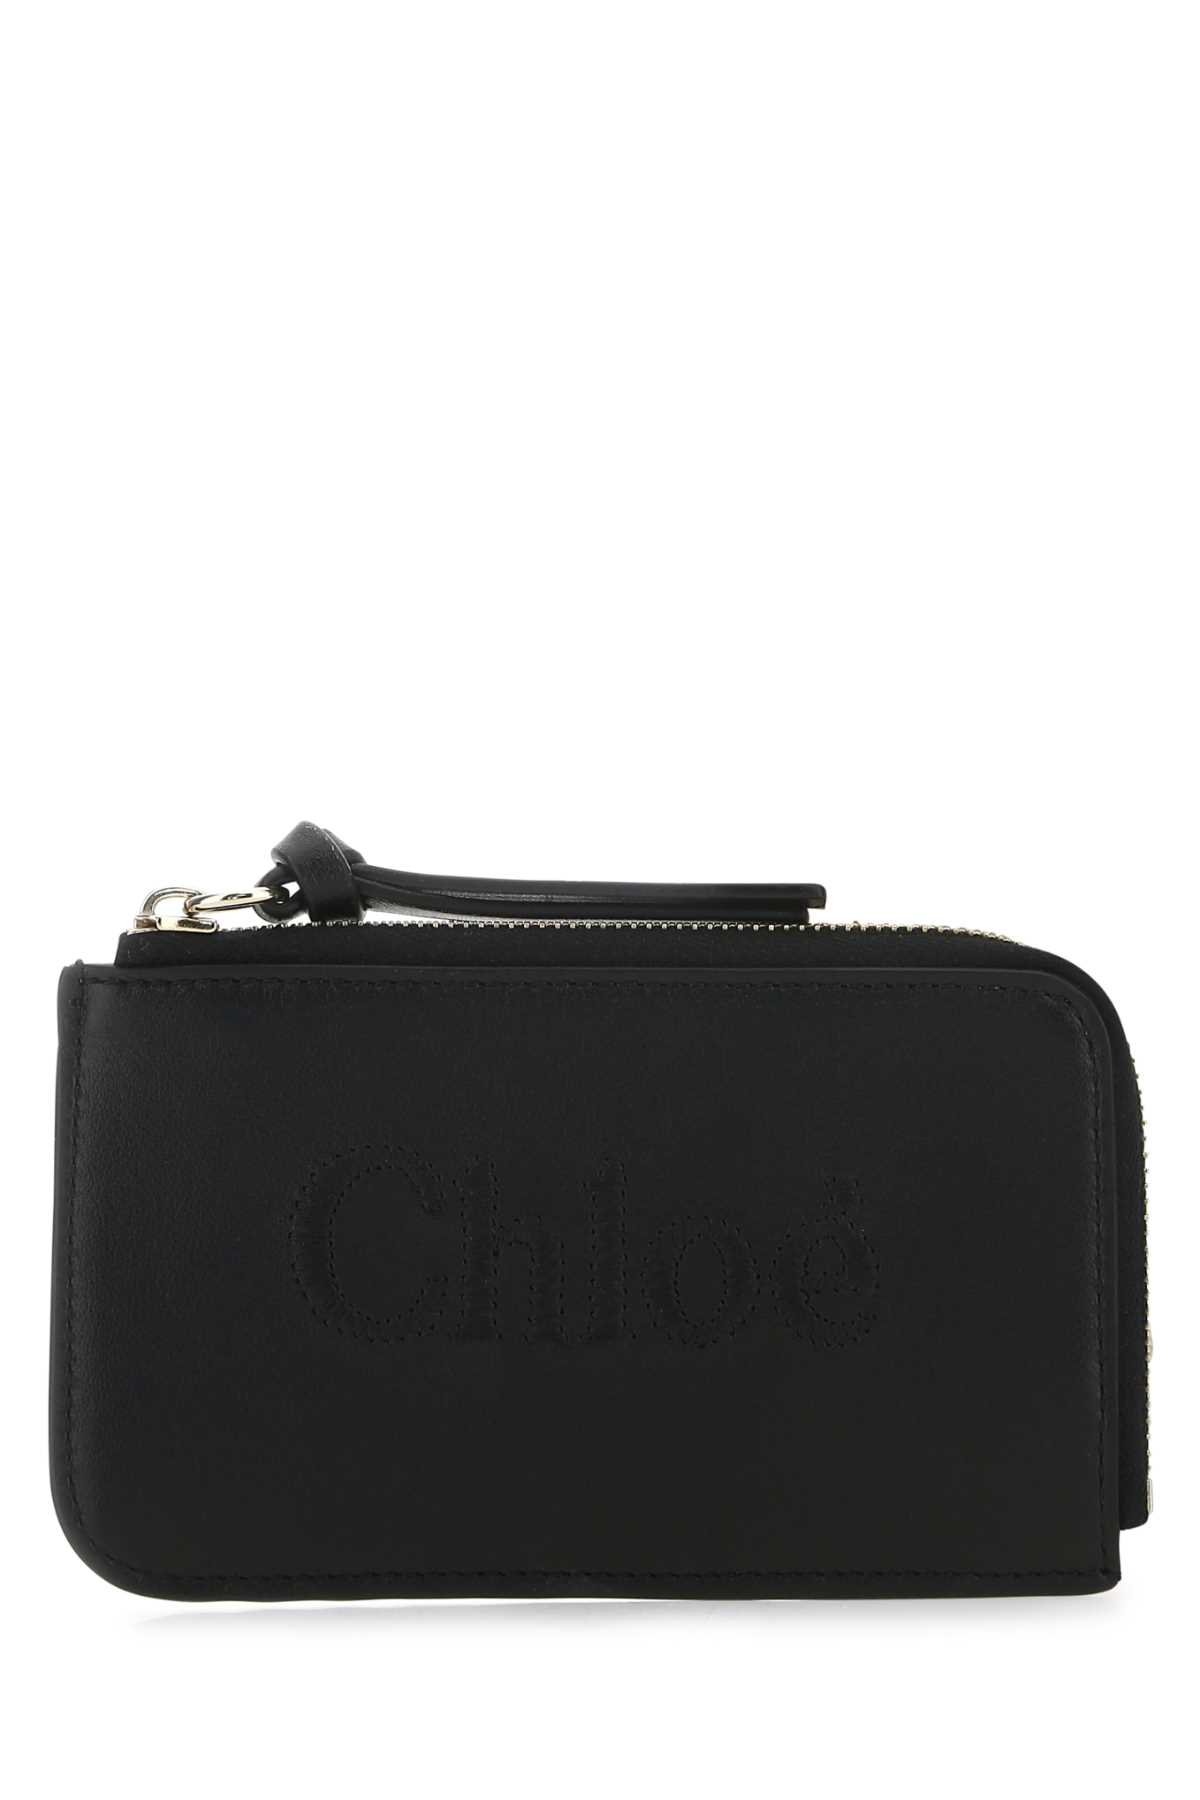 Chloé Black Leather Card Holder In 001